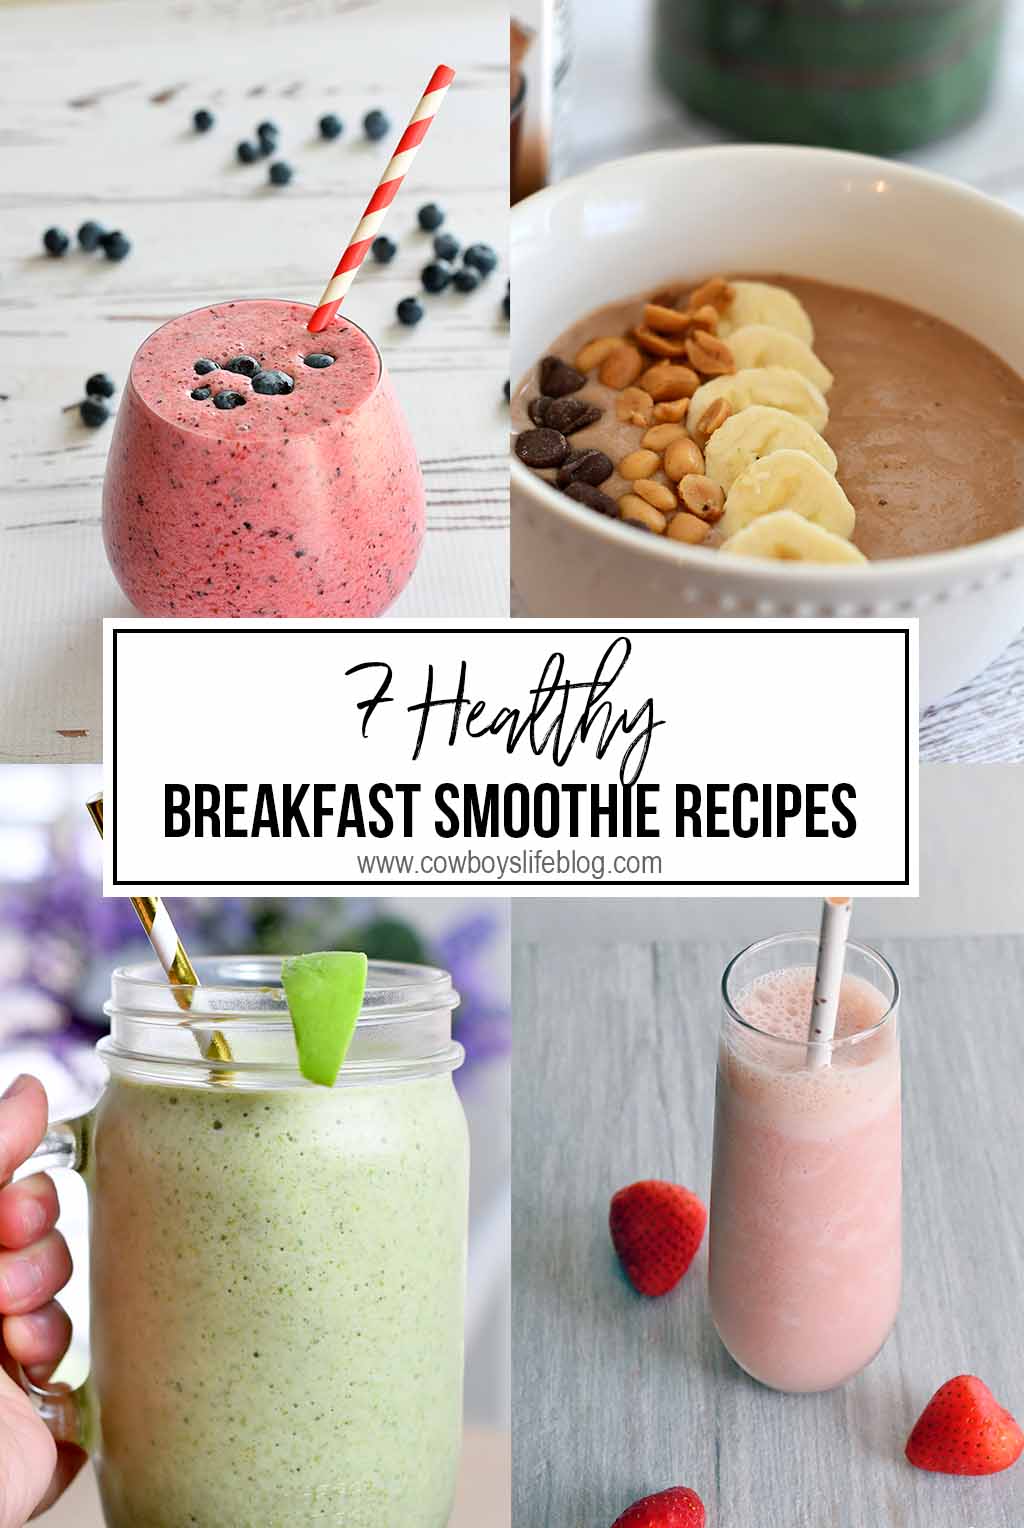 7 Healthy Breakfast Smoothies | Green Smoothies | Peanut Butter Smoothies | Avocado Smoothie #healthysmoothies #smoothies #easybreakfast